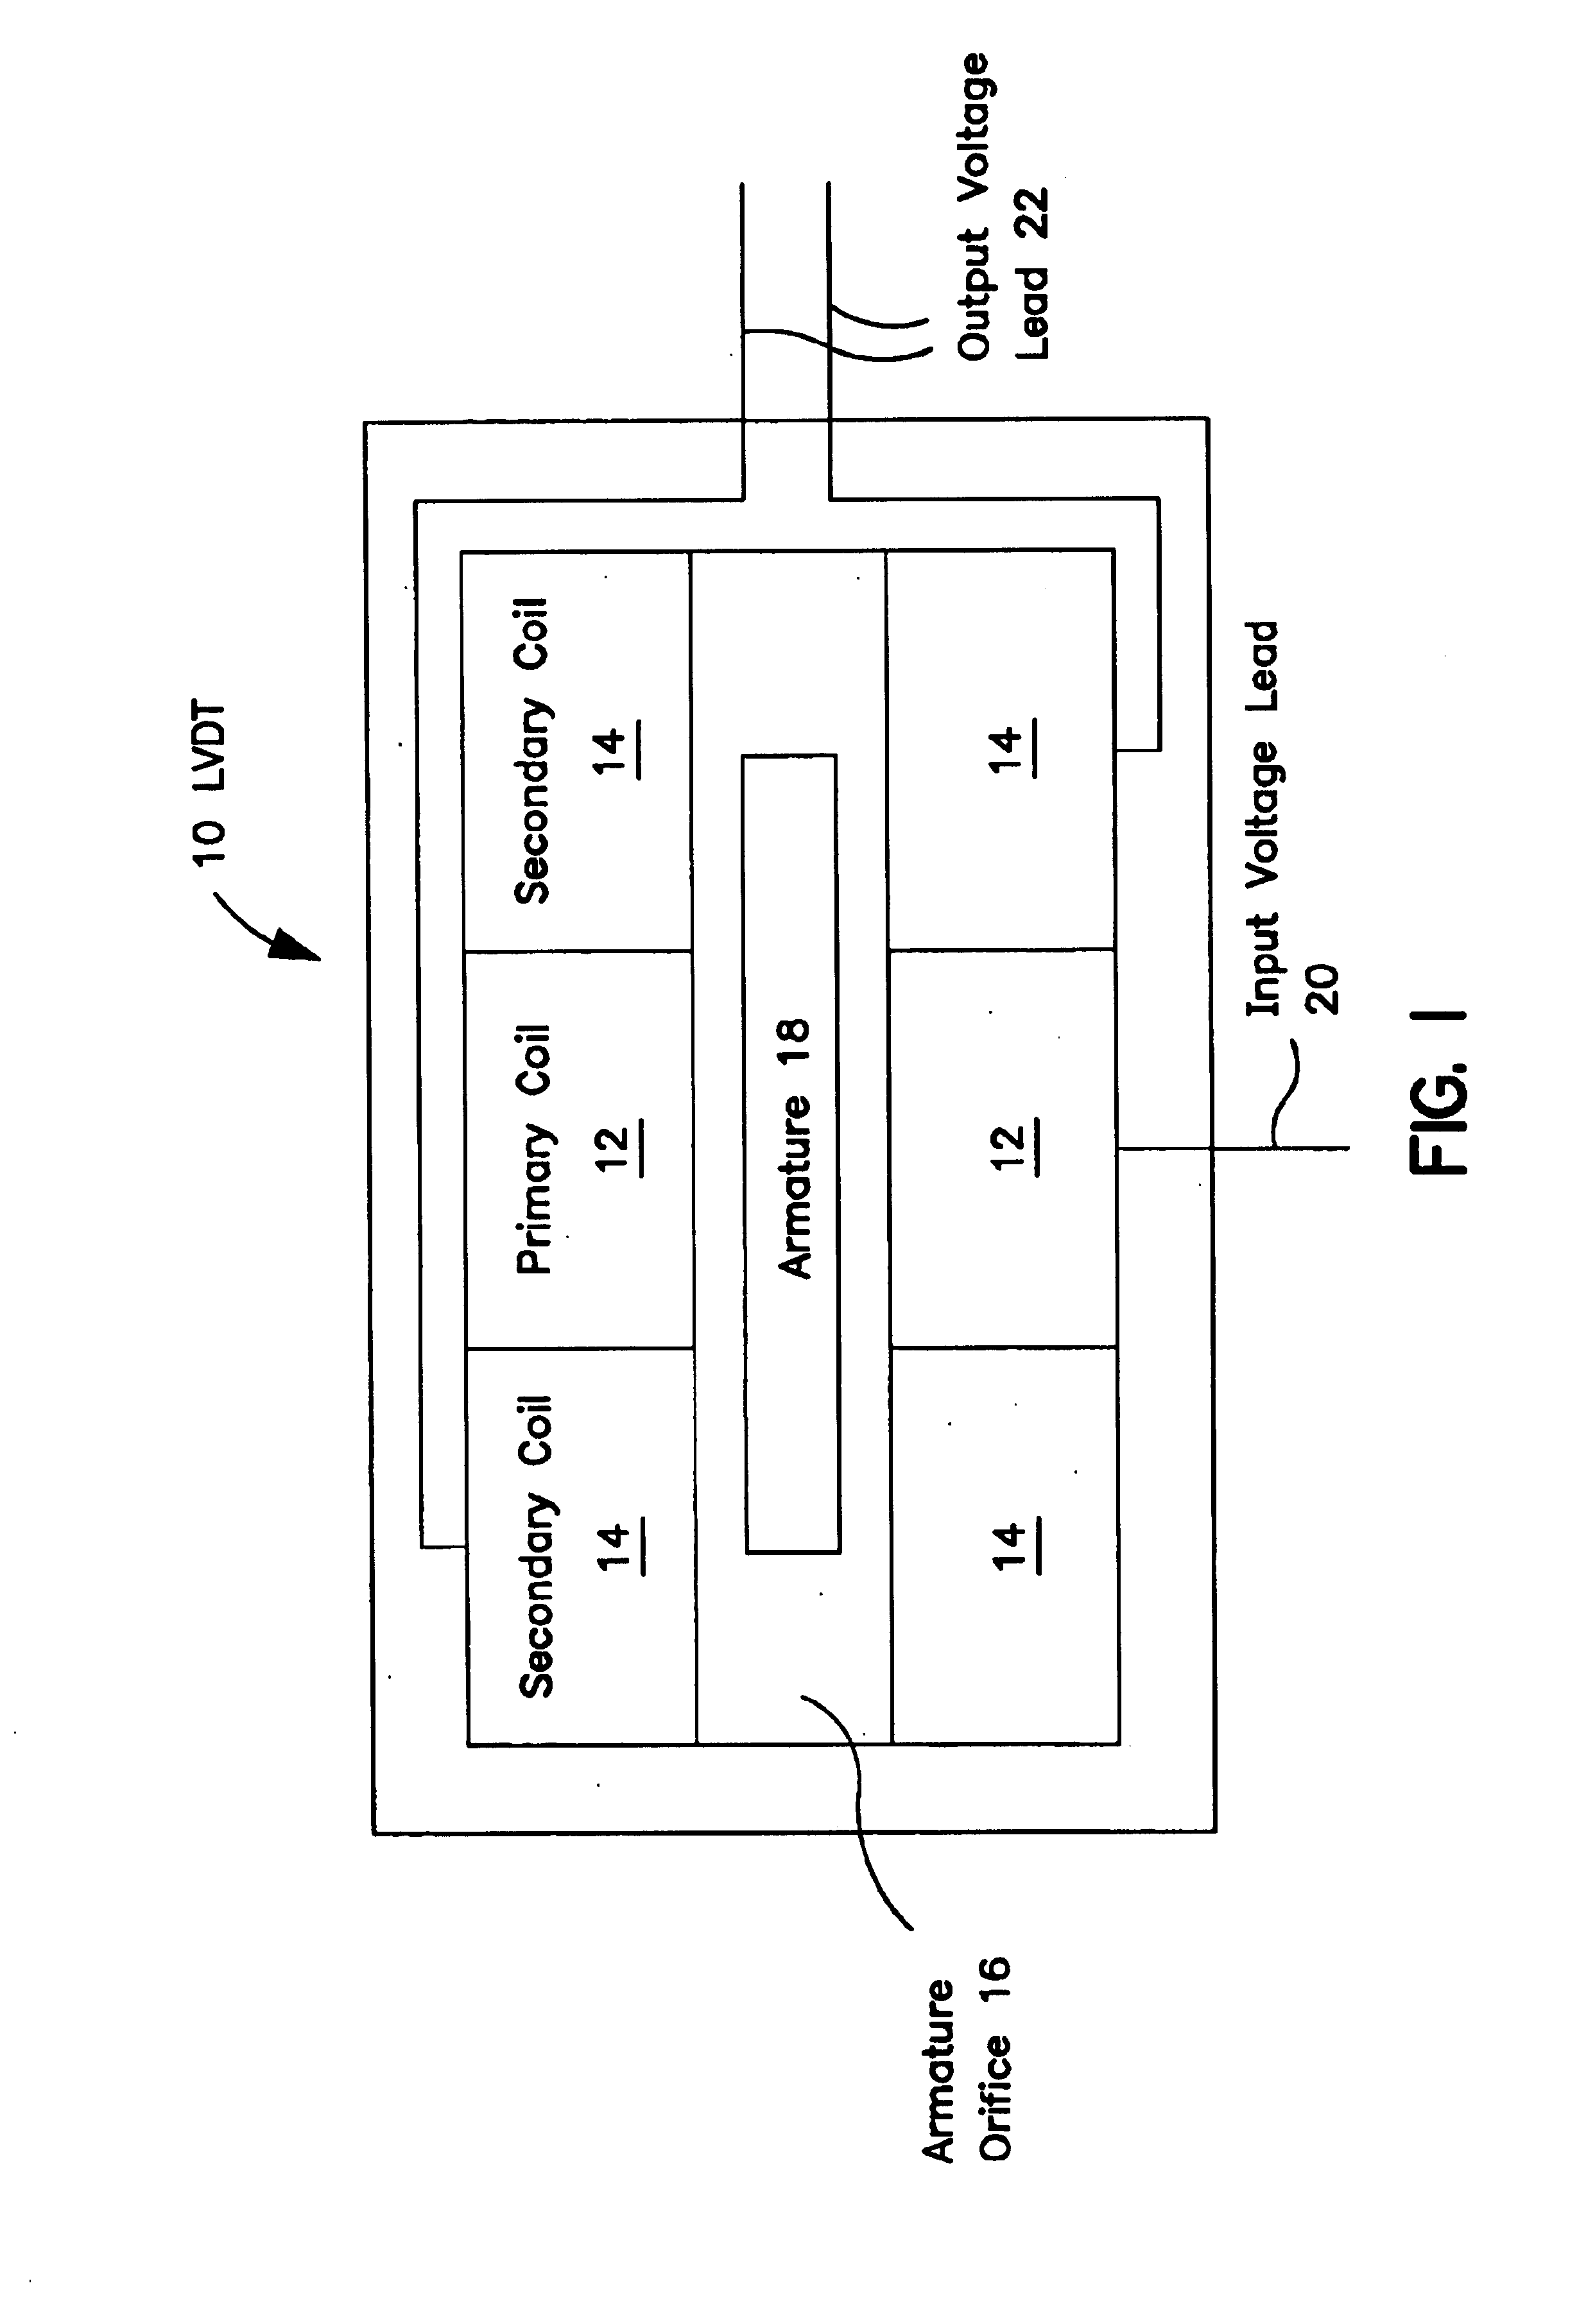 Method and apparatus for calibrating a linear variable differential transformer